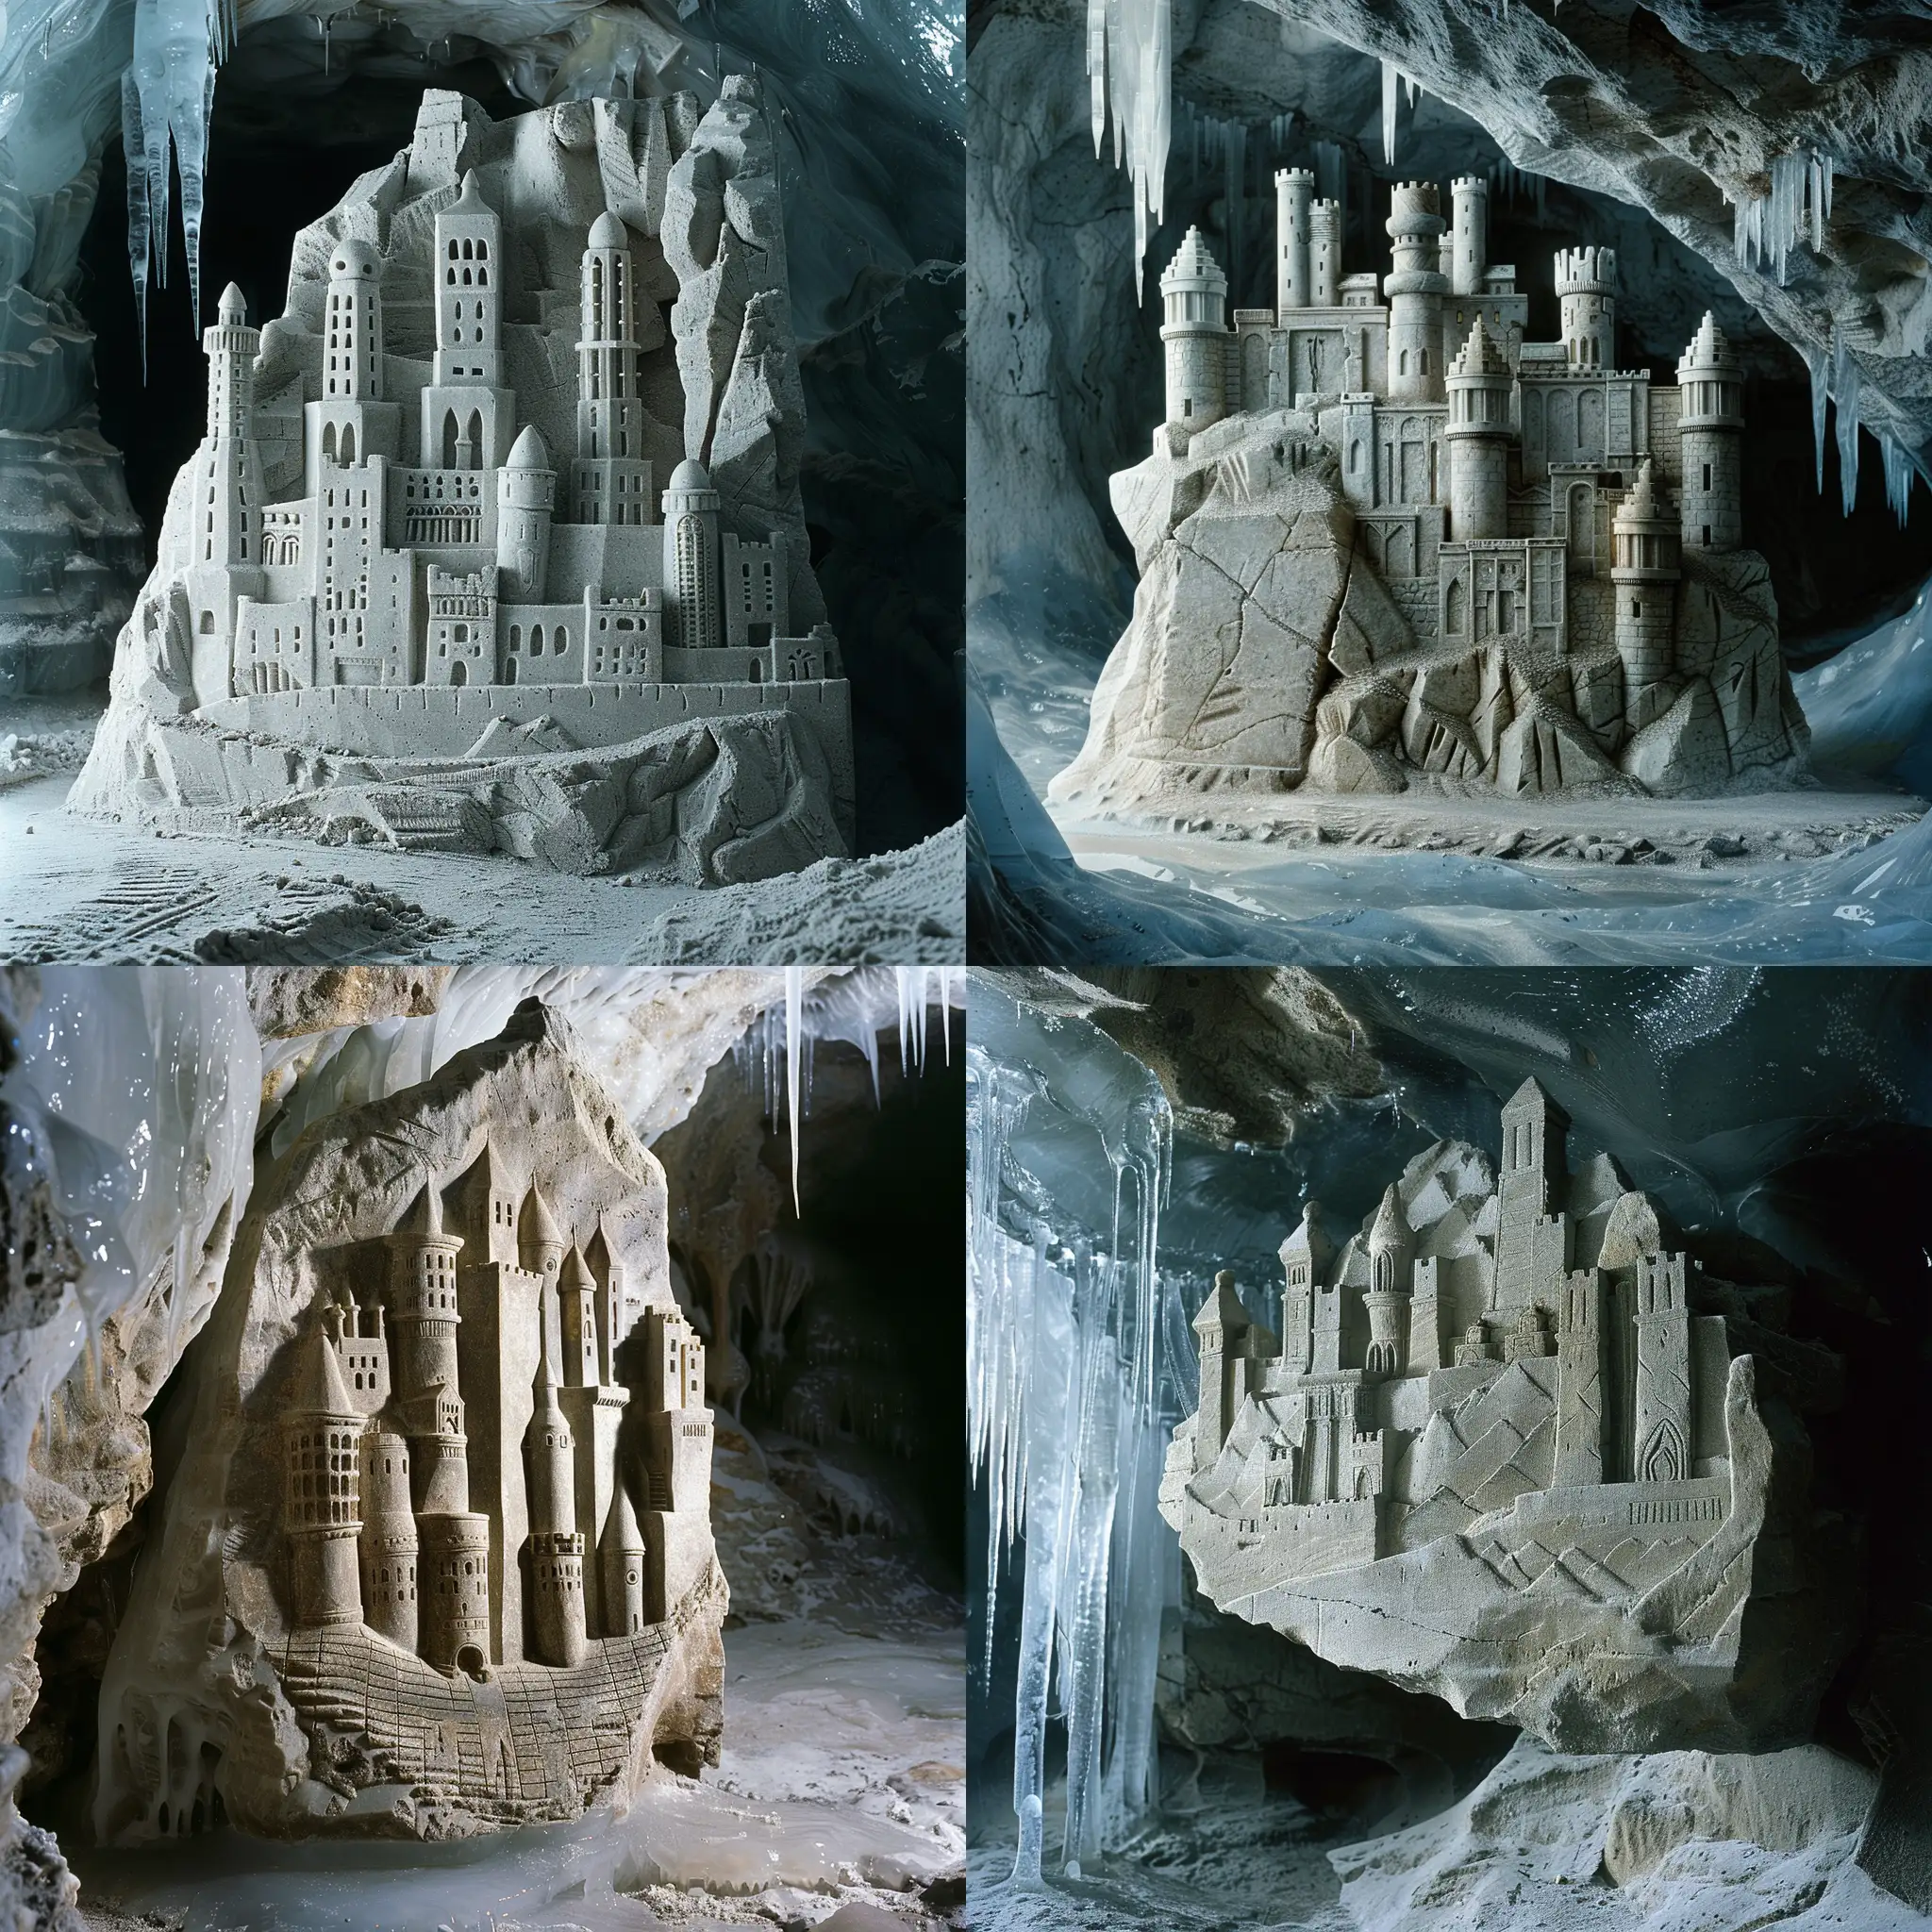 City-of-Towers-Stone-Relief-in-Dark-Ice-Cave